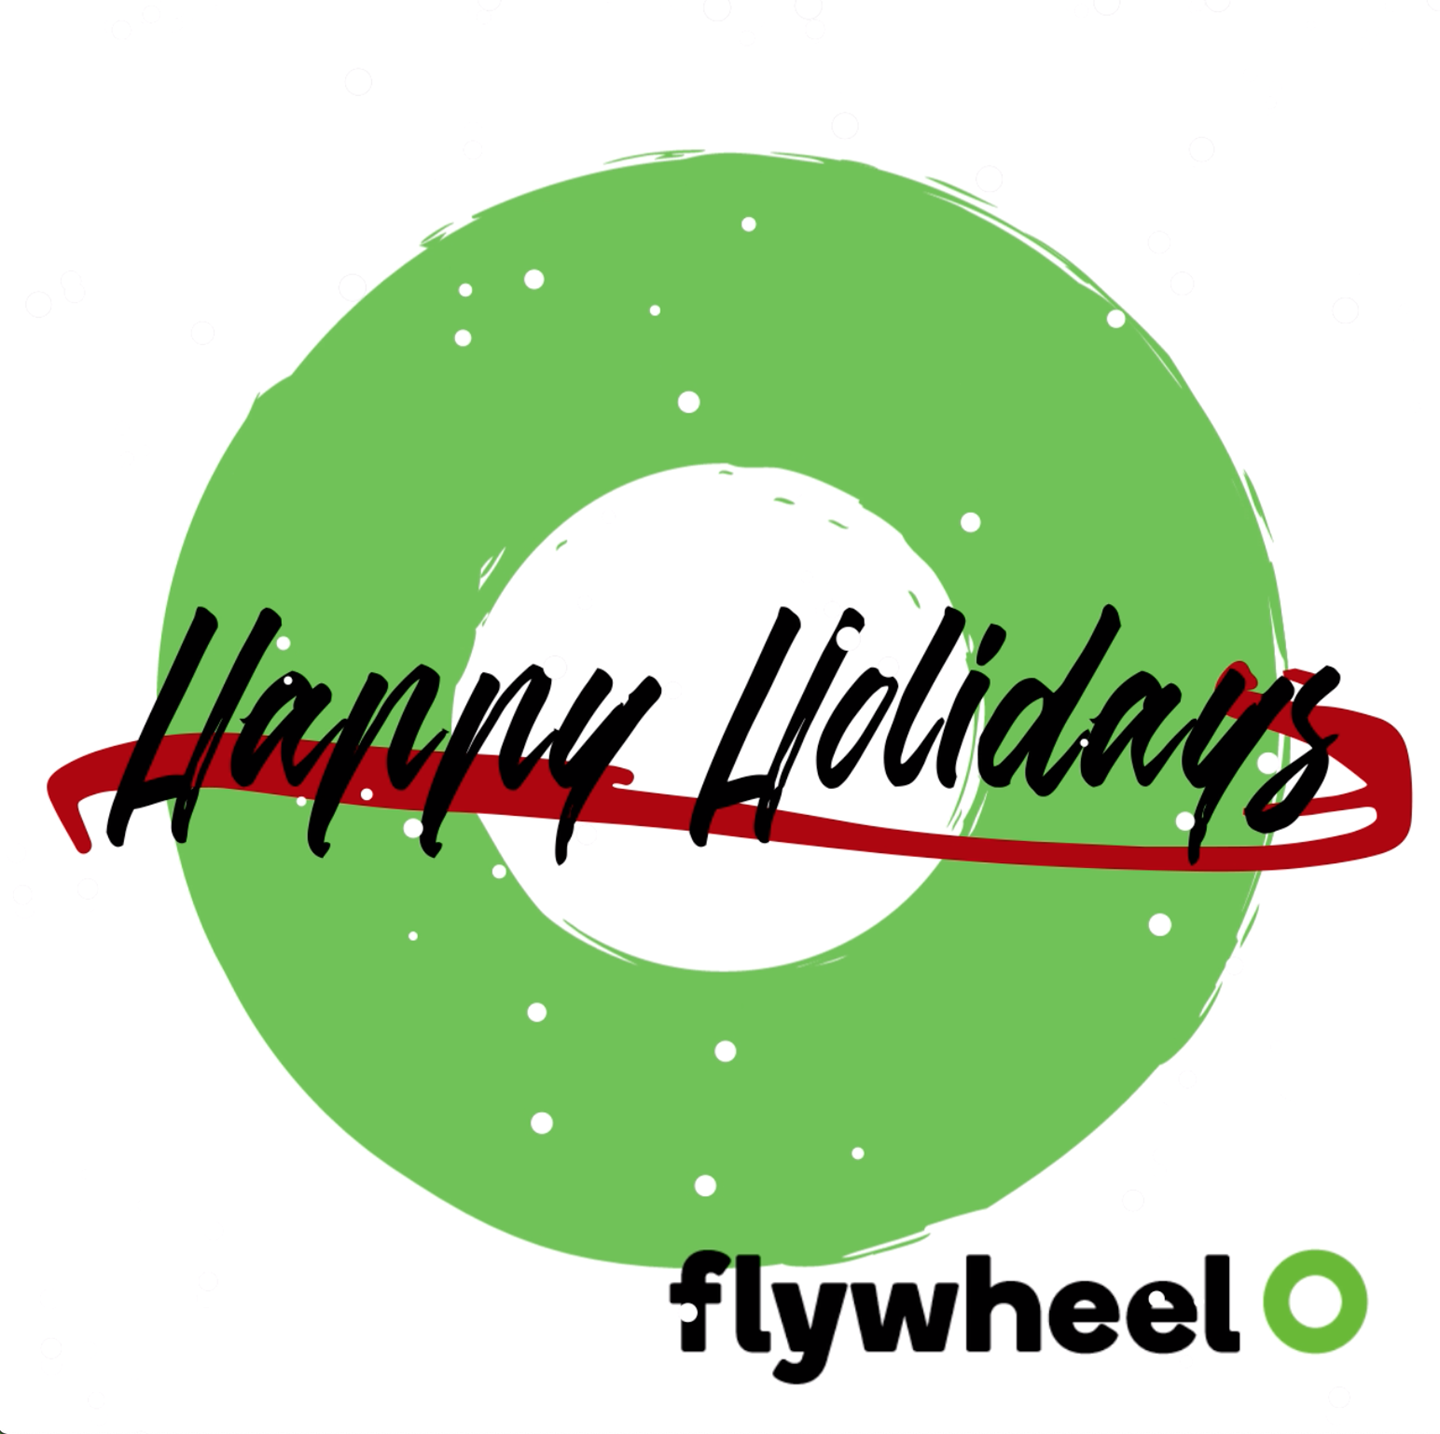 Happy holidays from Flywheel in 2018